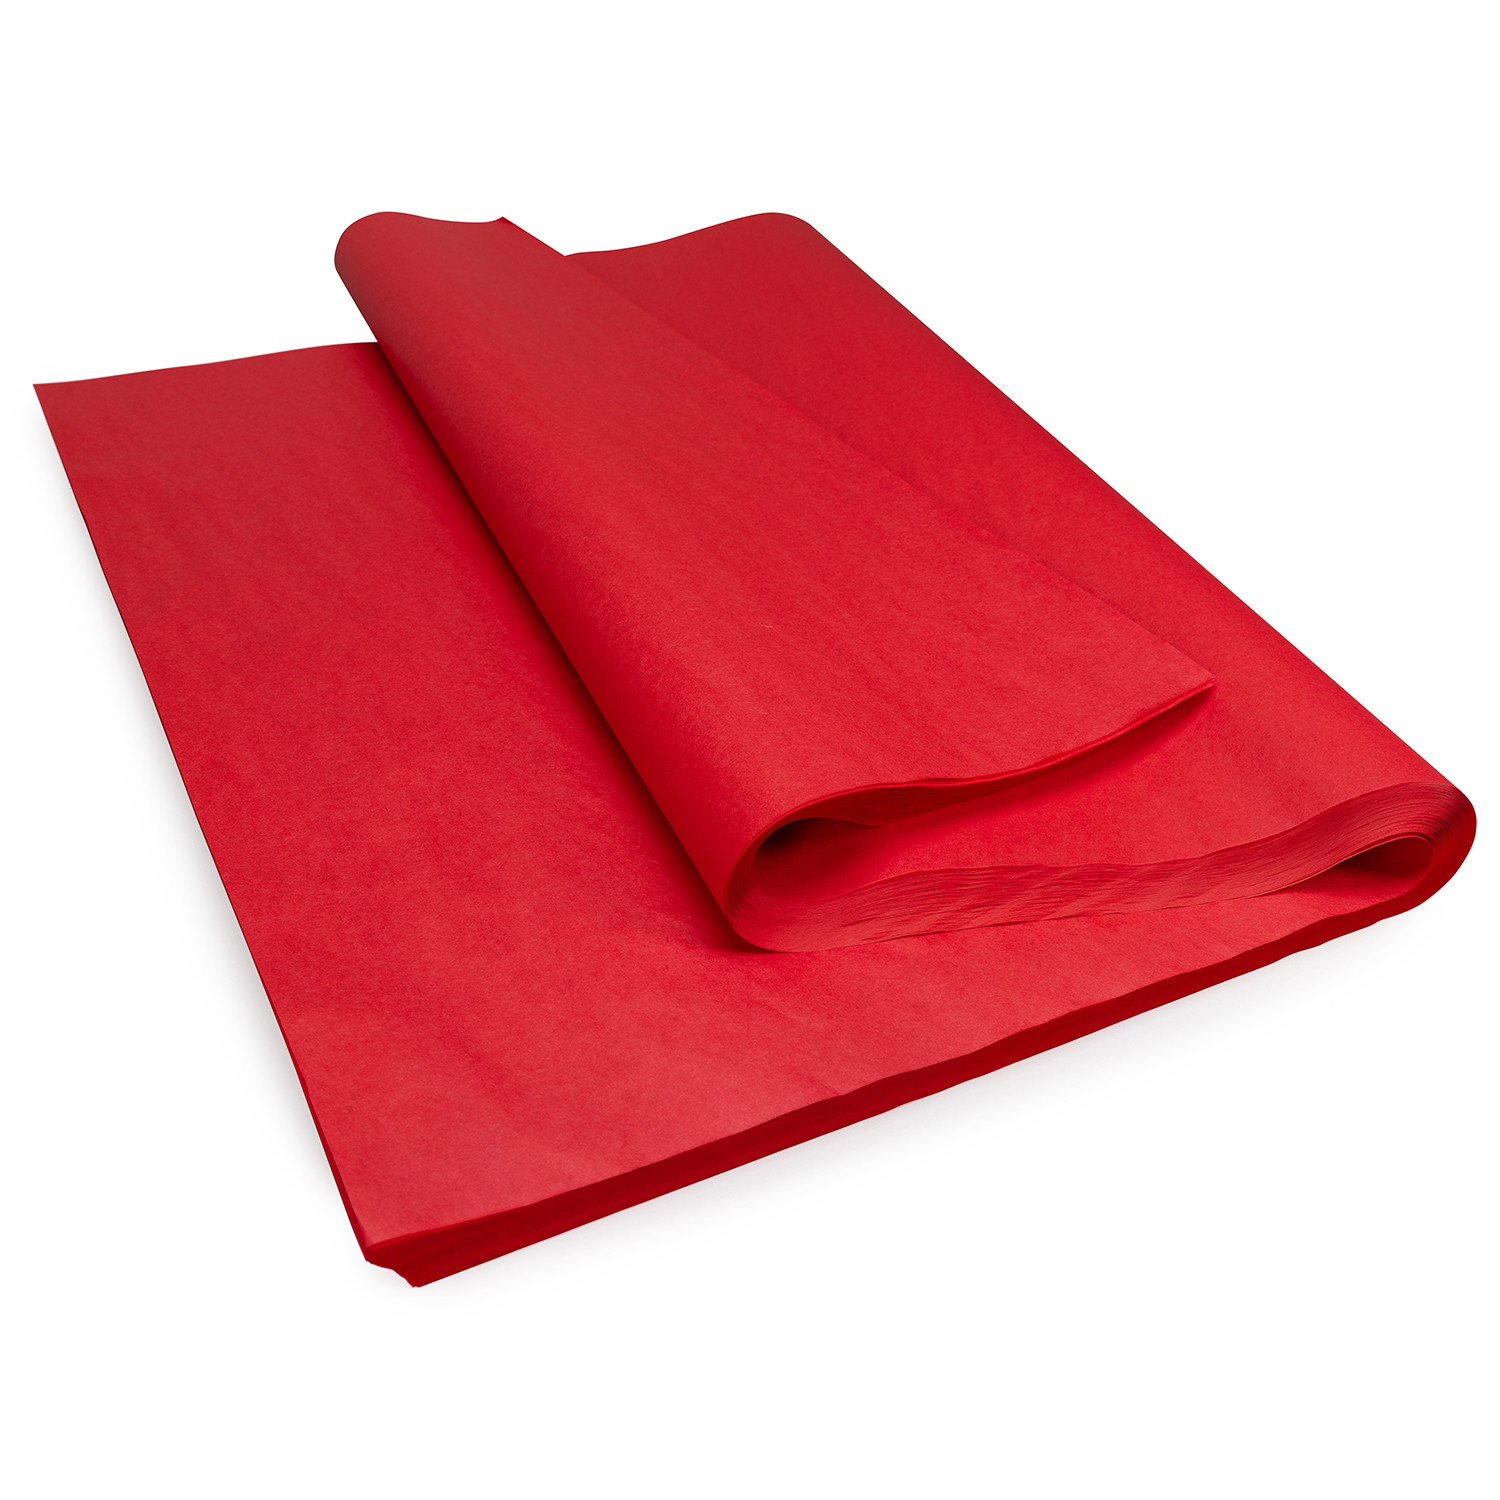 Tissue Paper Sheets - 15 x 20, Red - ULINE - Bundle of 960 Sheets - S-13177R